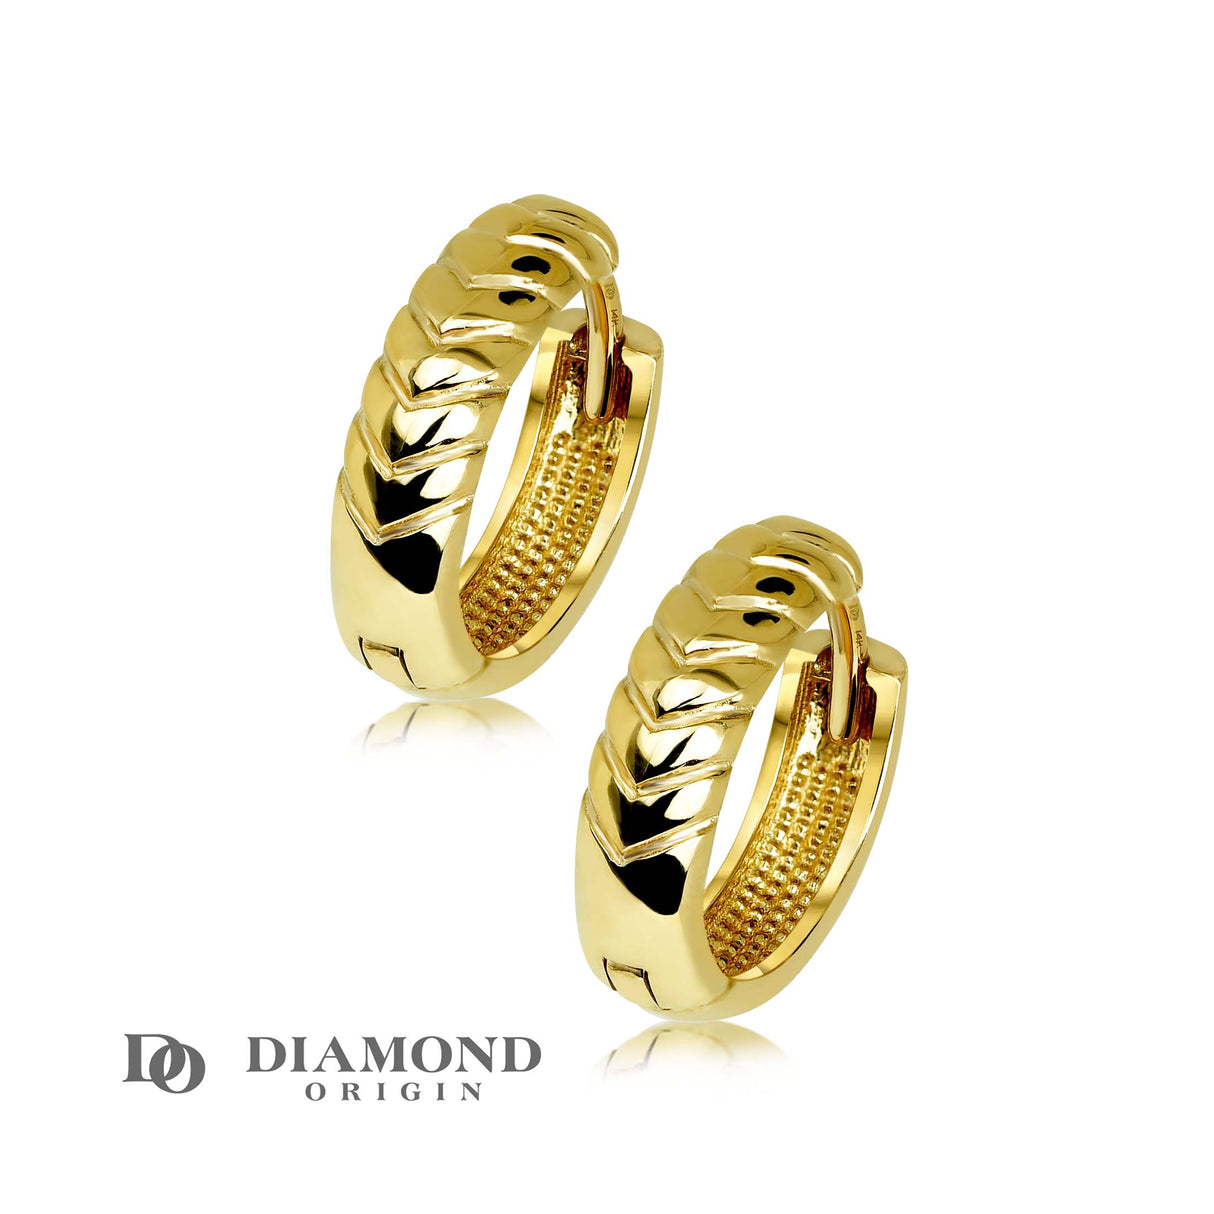 14K Solid Gold Chevron Twisted Hinge Hoops. Designed to impress and last, these earrings meld the timeless allure of gold with a distinctive chevron twisted design, creating a captivating interplay of light and texture.